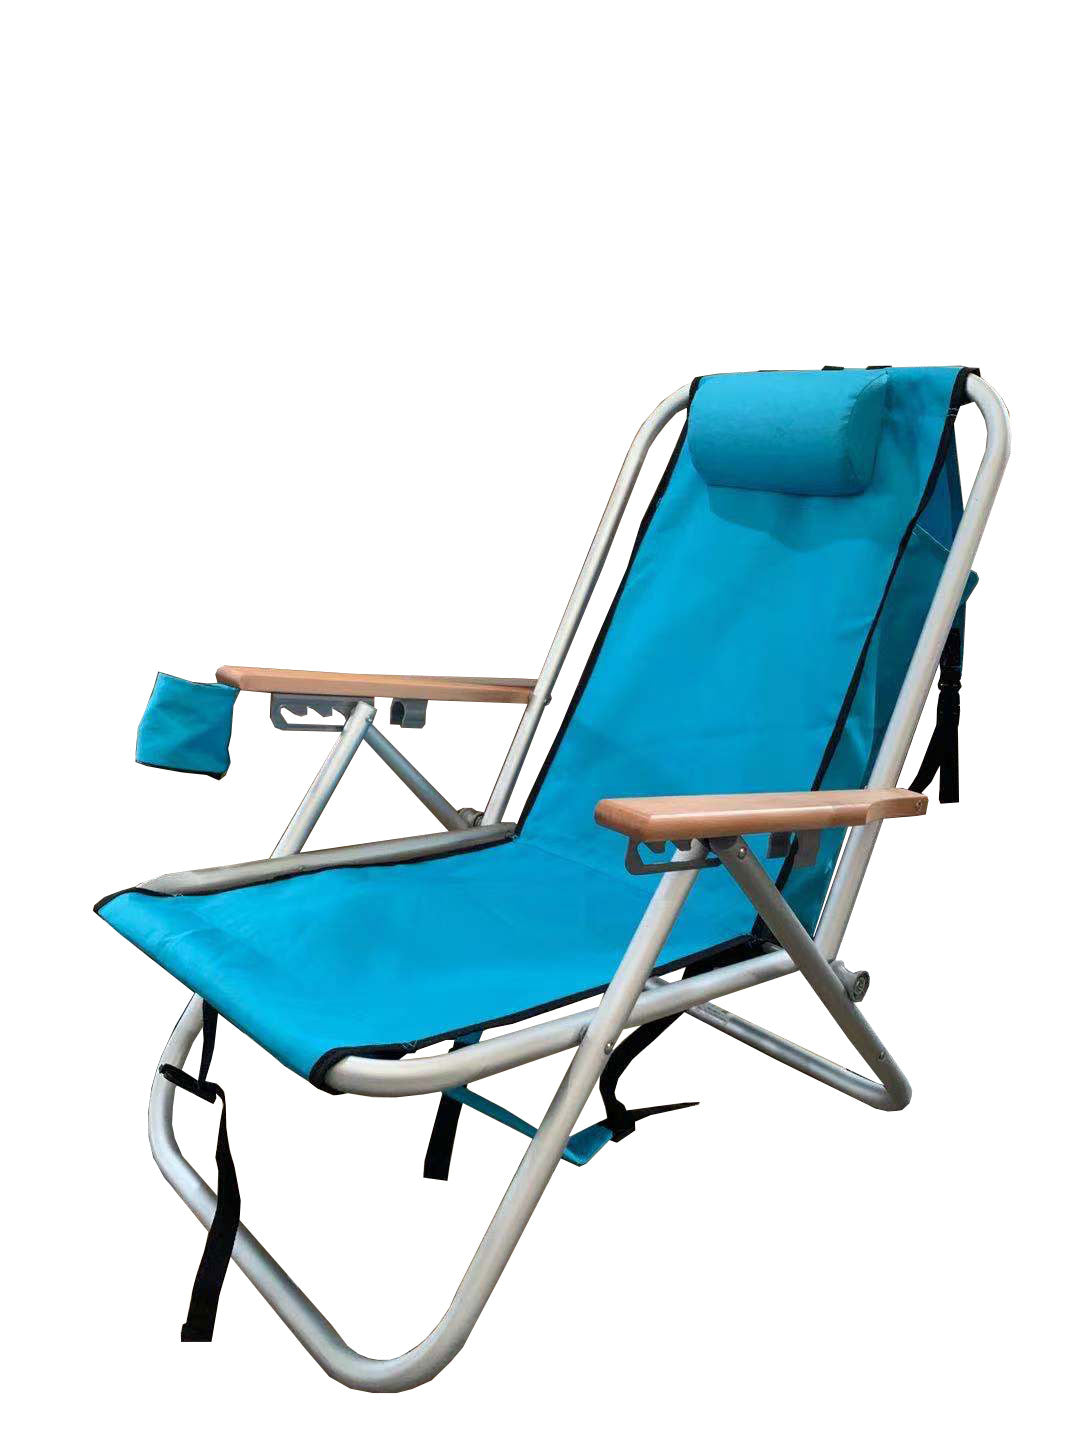 Wearever Backpack Chair - Turquoise